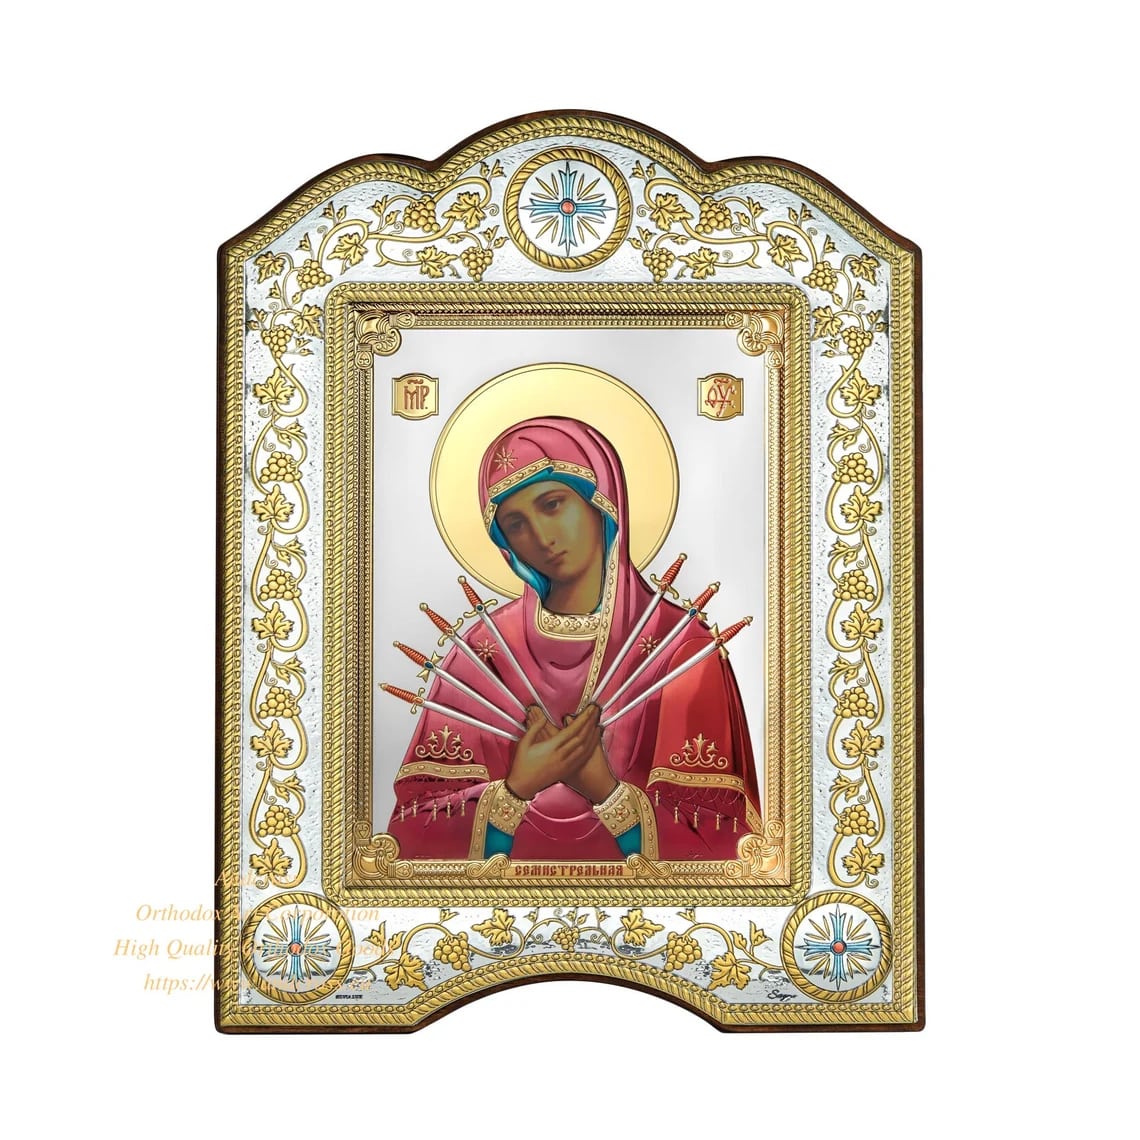 The Great Miraculous Christian Orthodox Silver Icon — The Seven Swords Mother of God 21×28 Gold and silver version/Coloured version. B336|The Great Miraculous Christian Orthodox Silver Icon — The Seven Swords Mother of God 21×28 Gold and silver version/Coloured version. B336|The Great Miraculous Christian Orthodox Silver Icon — The Seven Swords Mother of God 21×28 Gold and silver version/Coloured version. B336|The Great Miraculous Christian Orthodox Silver Icon — The Seven Swords Mother of God 21×28 Gold and silver version/Coloured version. B336|The Great Miraculous Christian Orthodox Silver Icon — The Seven Swords Mother of God 21×28 Gold and silver version/Coloured version. B336|The Great Miraculous Christian Orthodox Silver Icon — The Seven Swords Mother of God 21×28 Gold and silver version/Coloured version. B336|The Great Miraculous Christian Orthodox Silver Icon — The Seven Swords Mother of God 21×28 Gold and silver version/Coloured version. B336